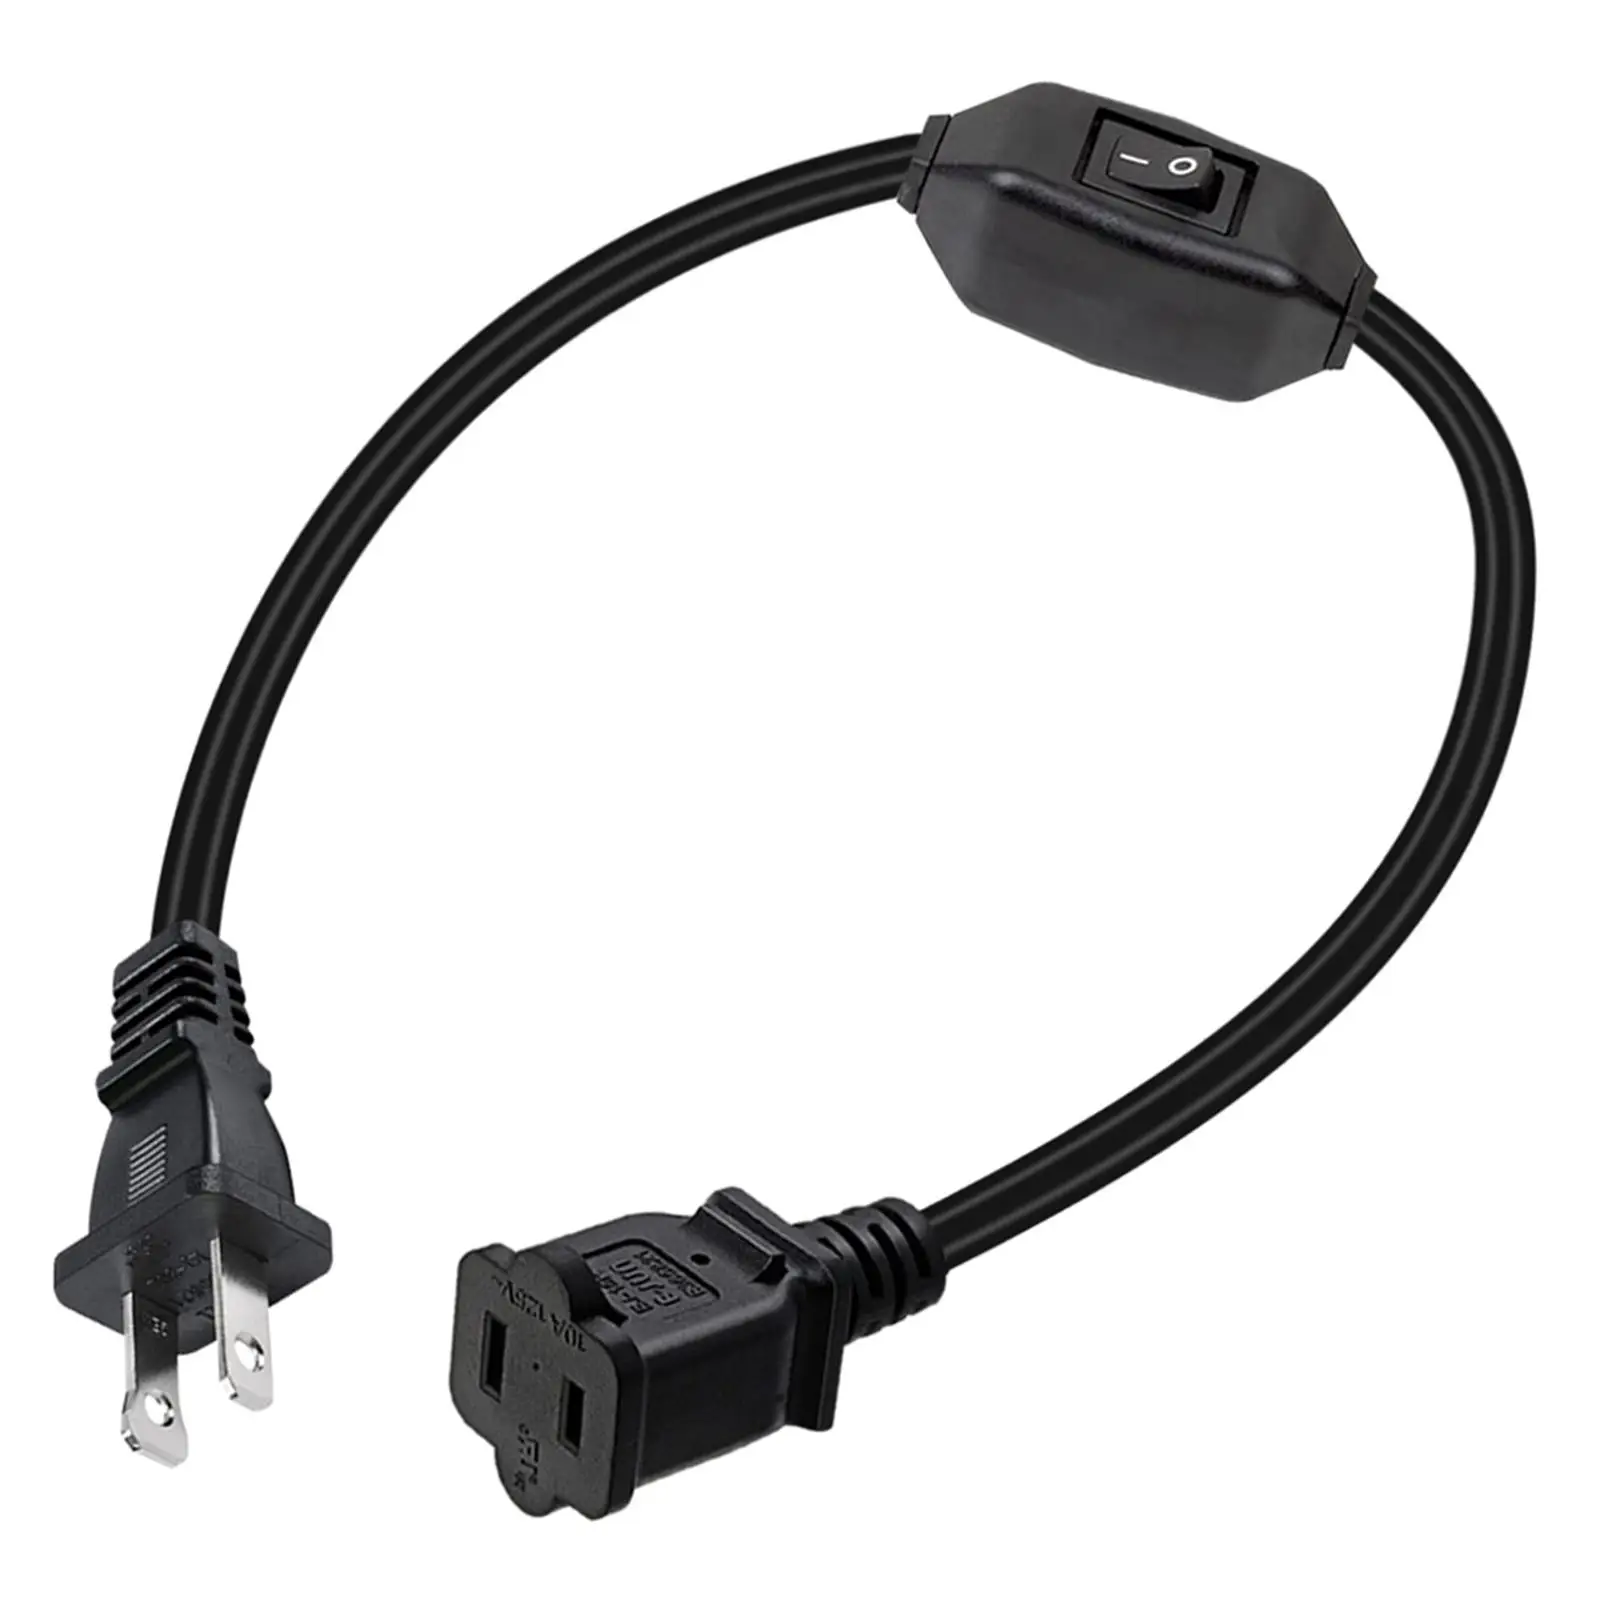 32cm Extension Cord, 2 Prong ,US, 13A 125V on/ off, Durable, Power Supply Cord, for Fan Lamp